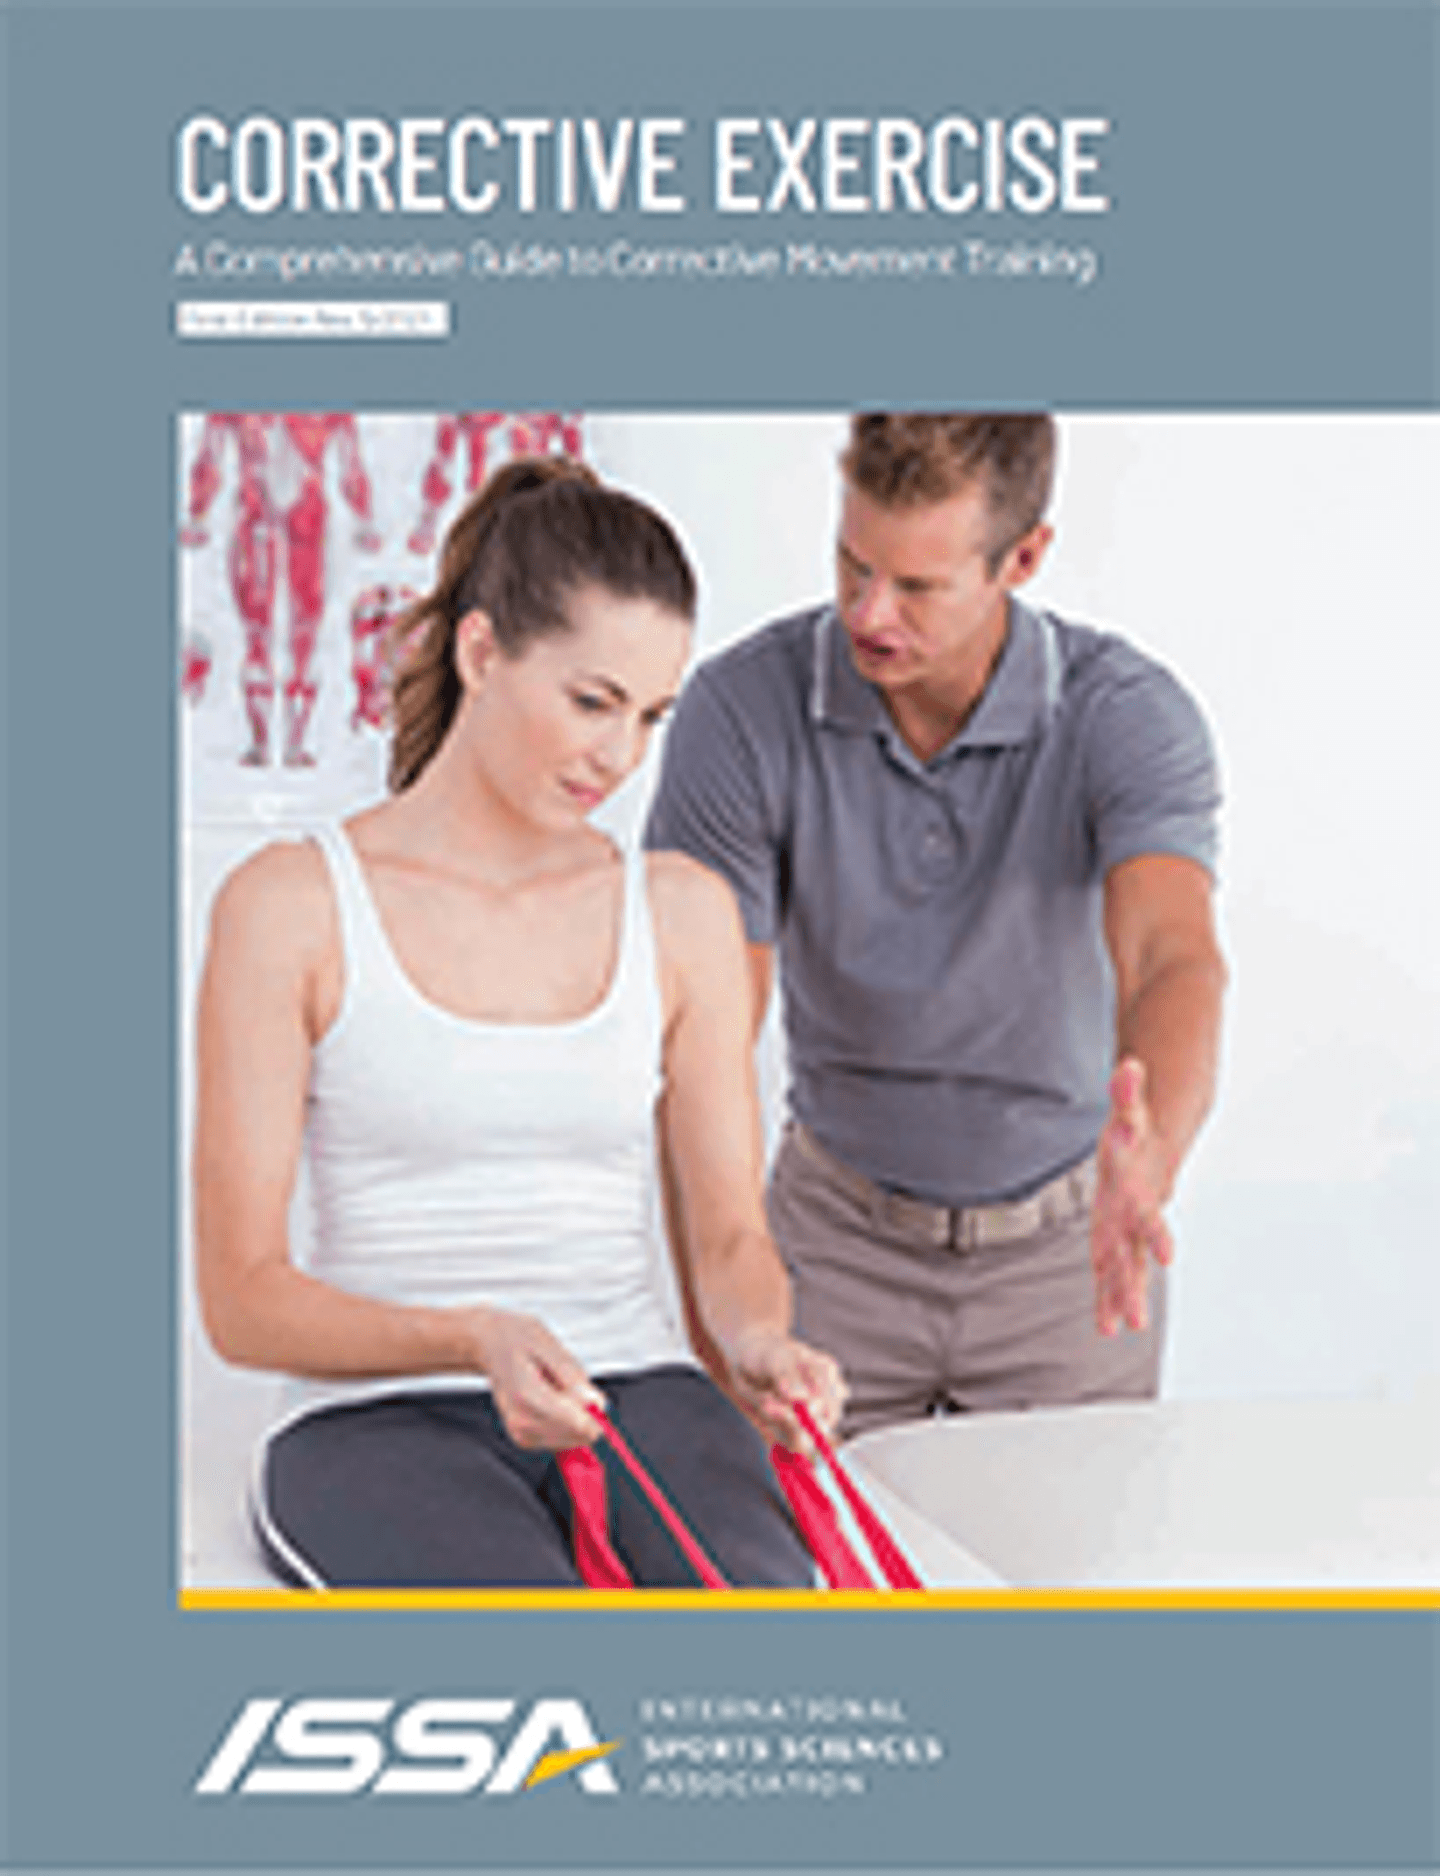 The cover to the Corrective Exercise Specialist Guide Book